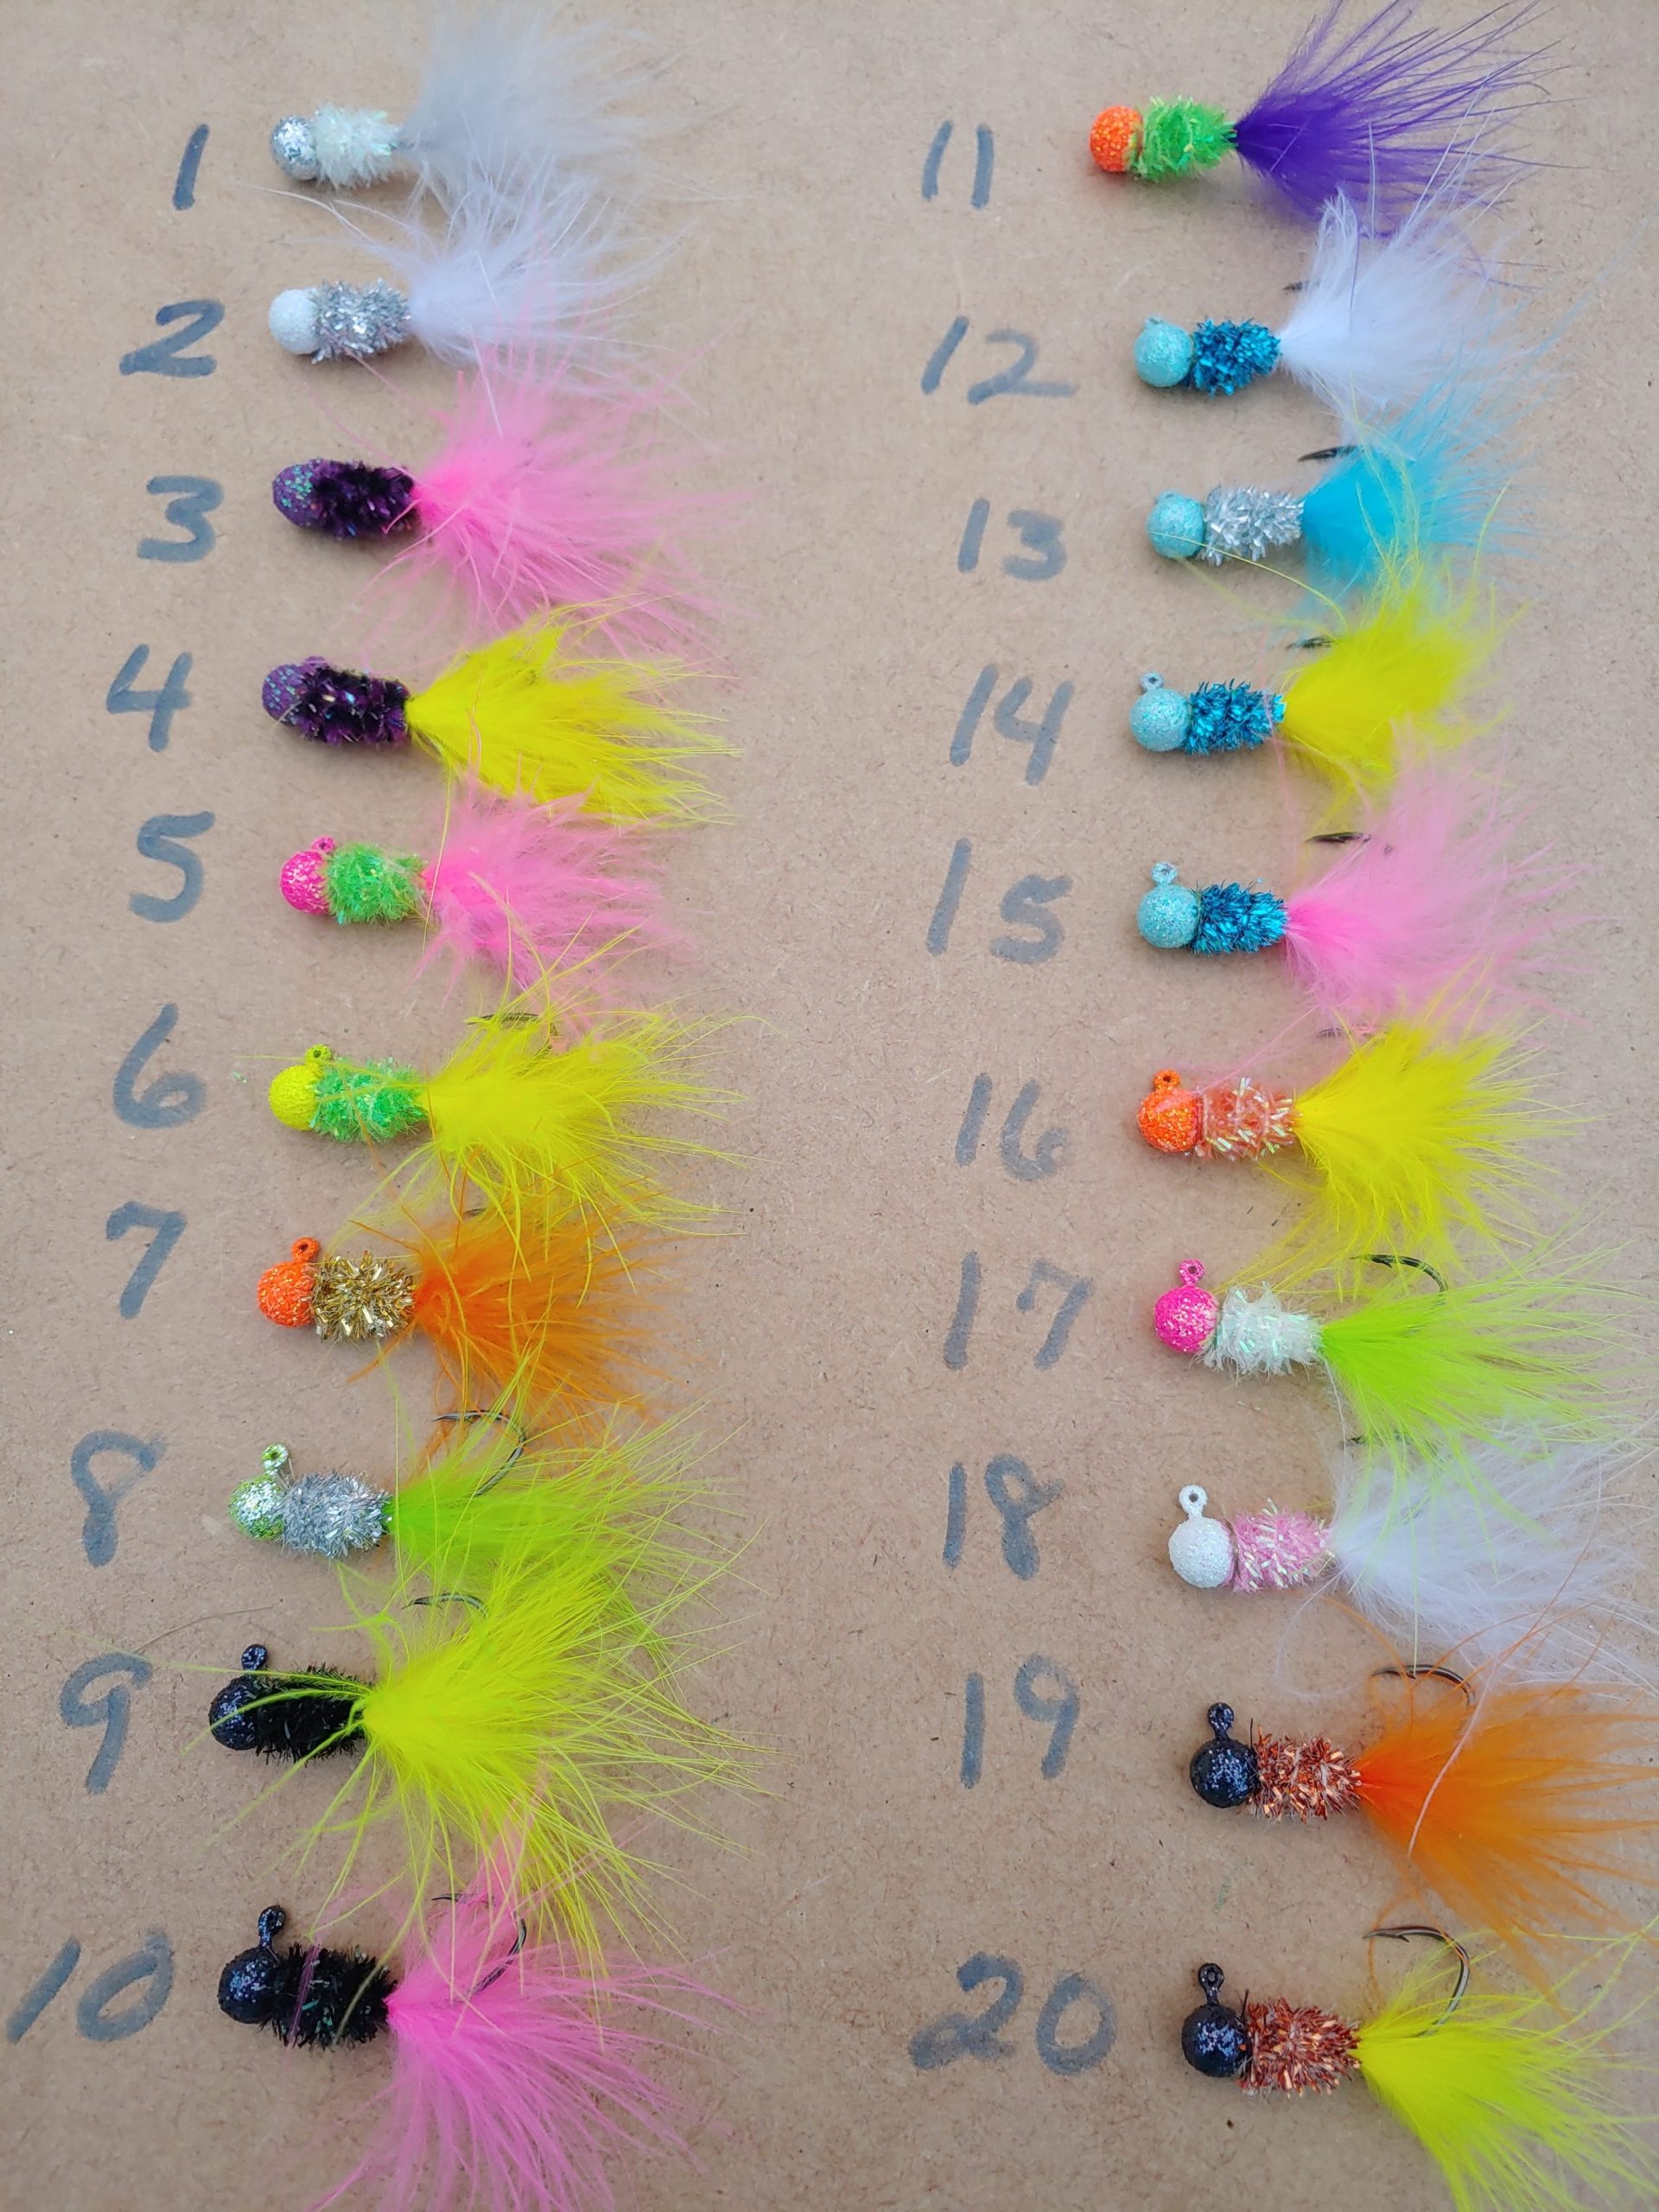 What Colors For Feather Jigs?